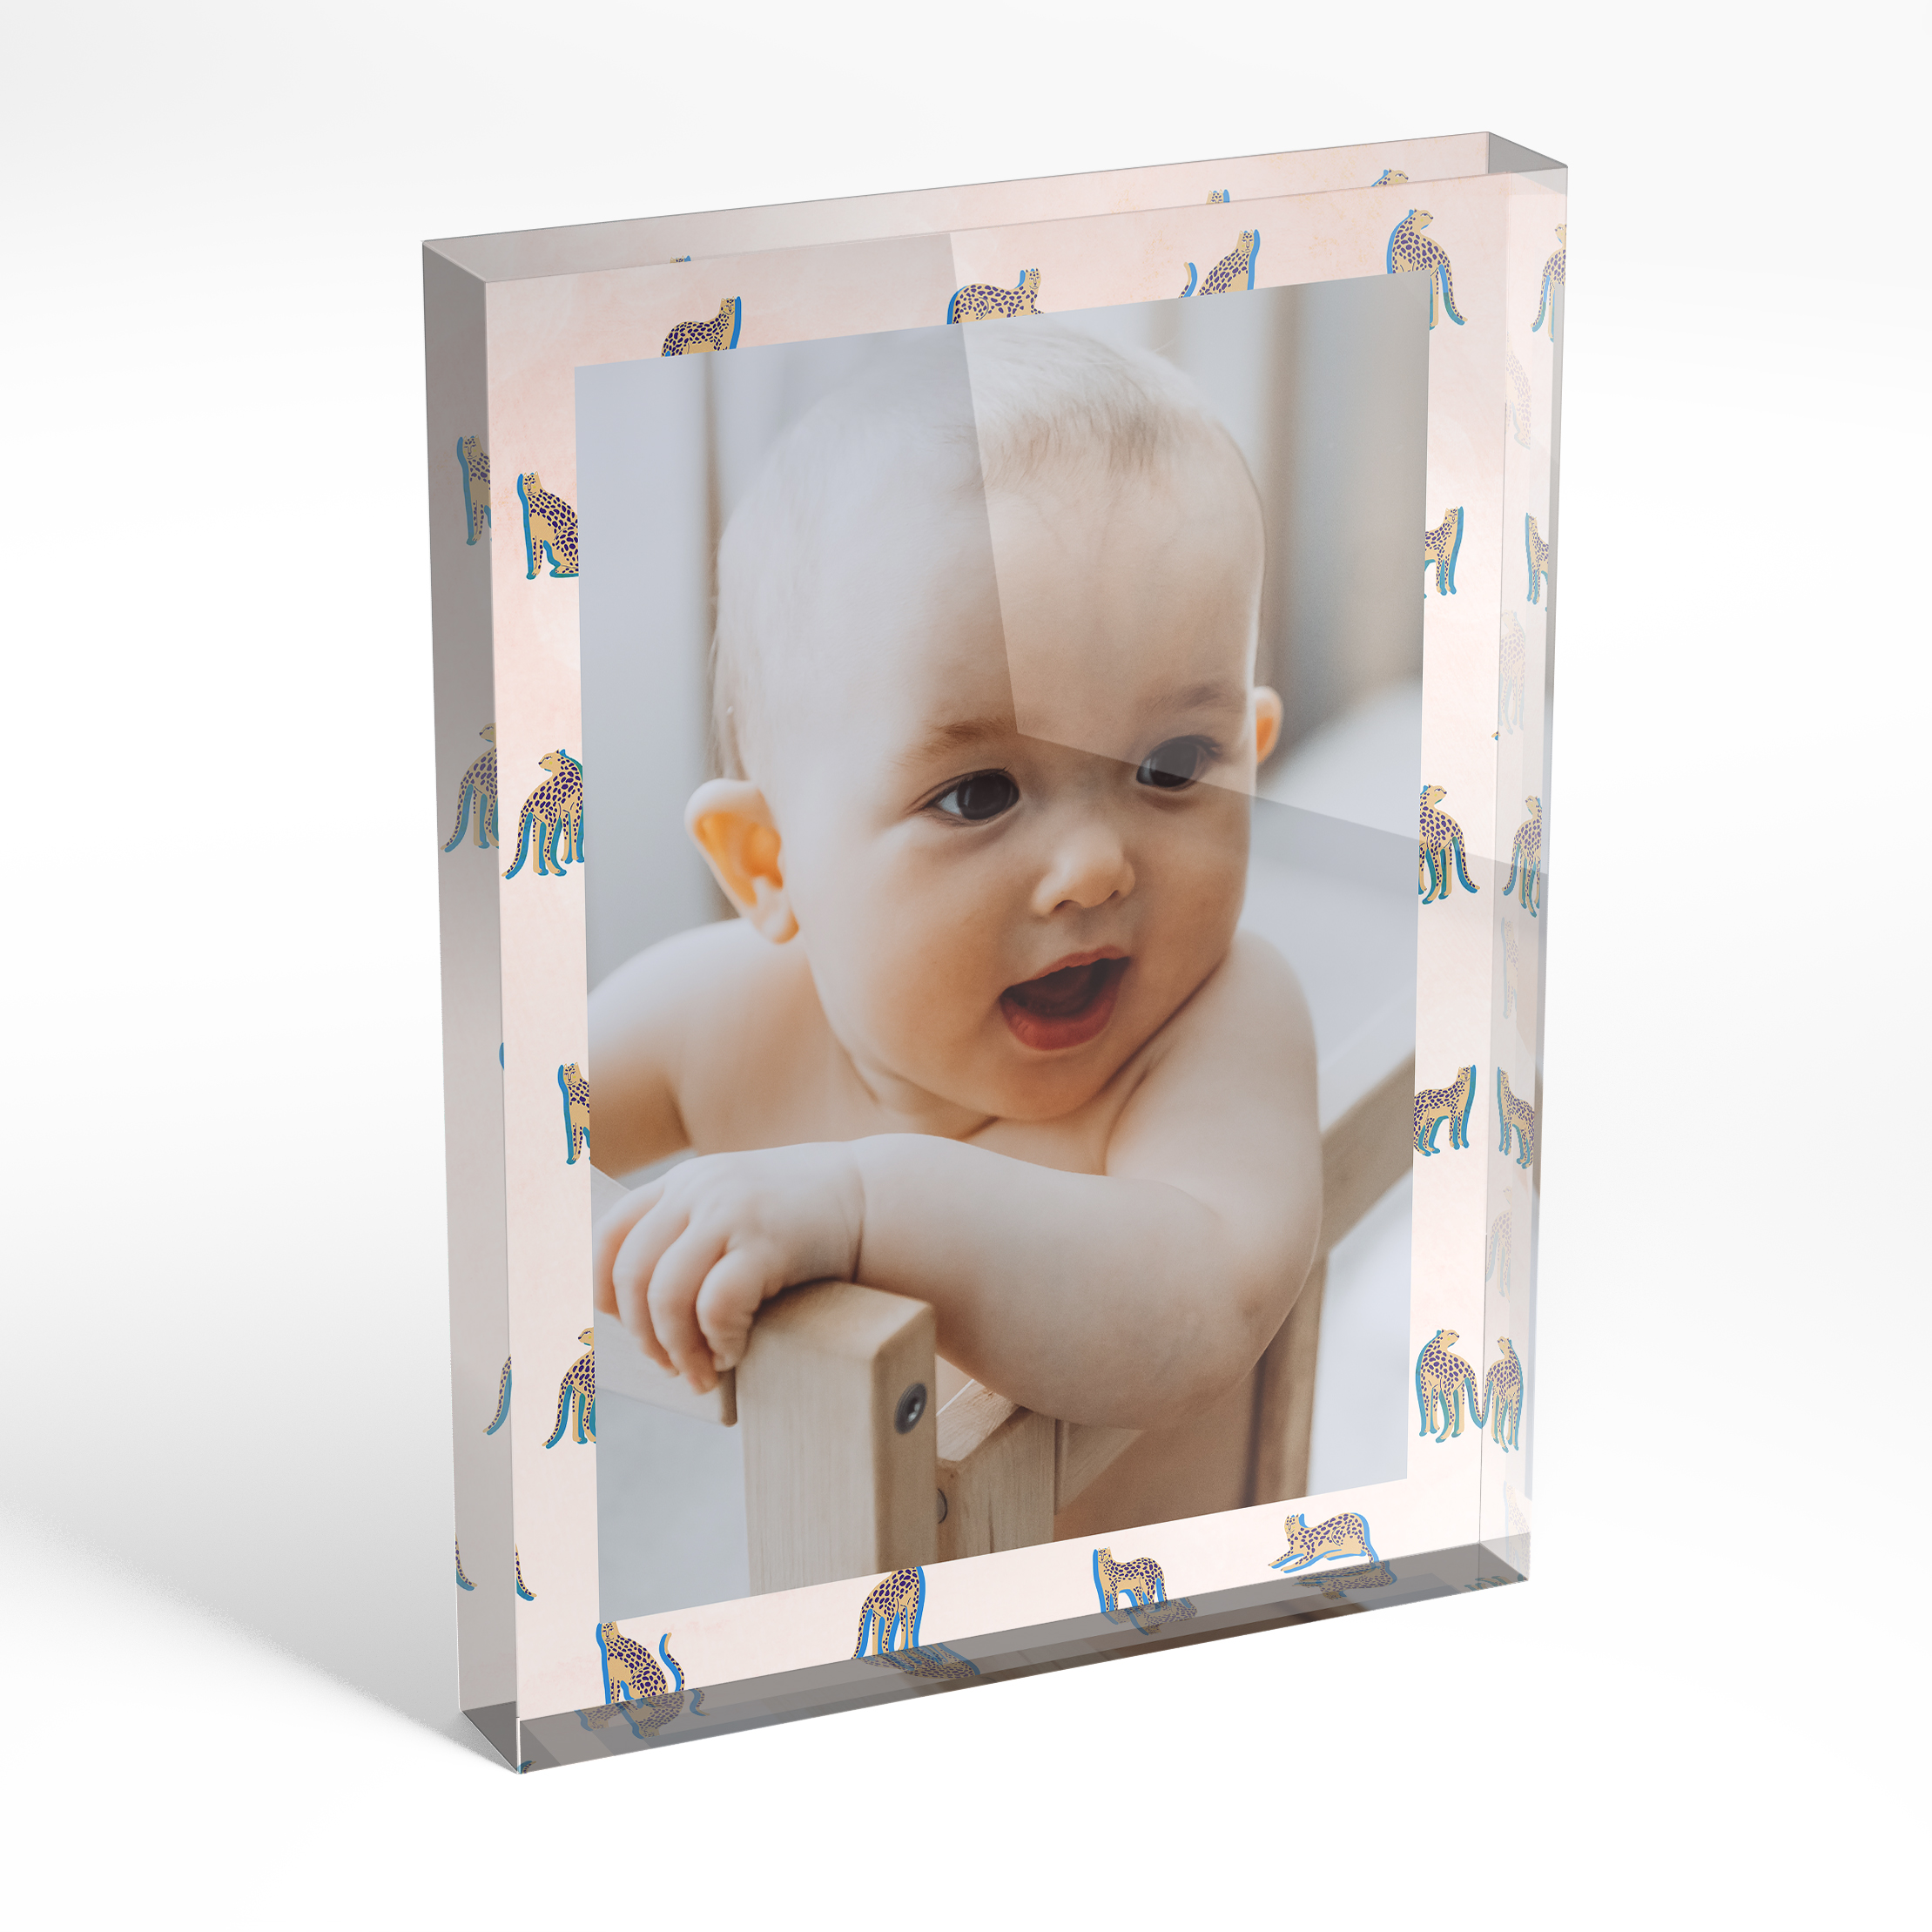 An angled side view of a portrait layout Acrylic Glass Photo Block with space for 1 photo. Thiis design is named "Big Cat". 